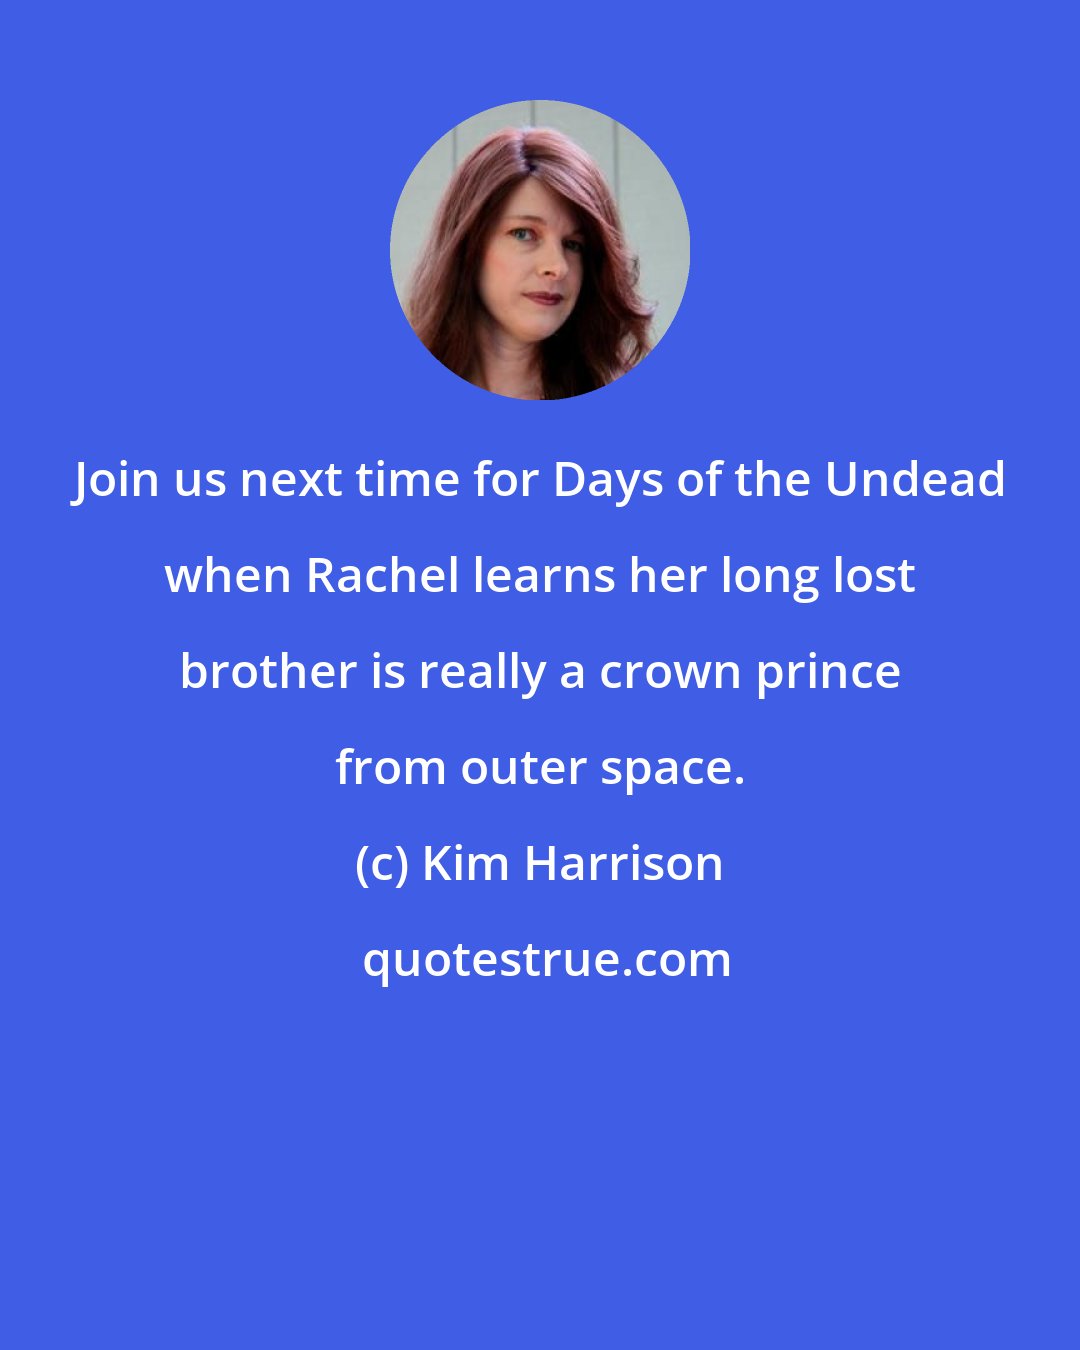 Kim Harrison: Join us next time for Days of the Undead when Rachel learns her long lost brother is really a crown prince from outer space.